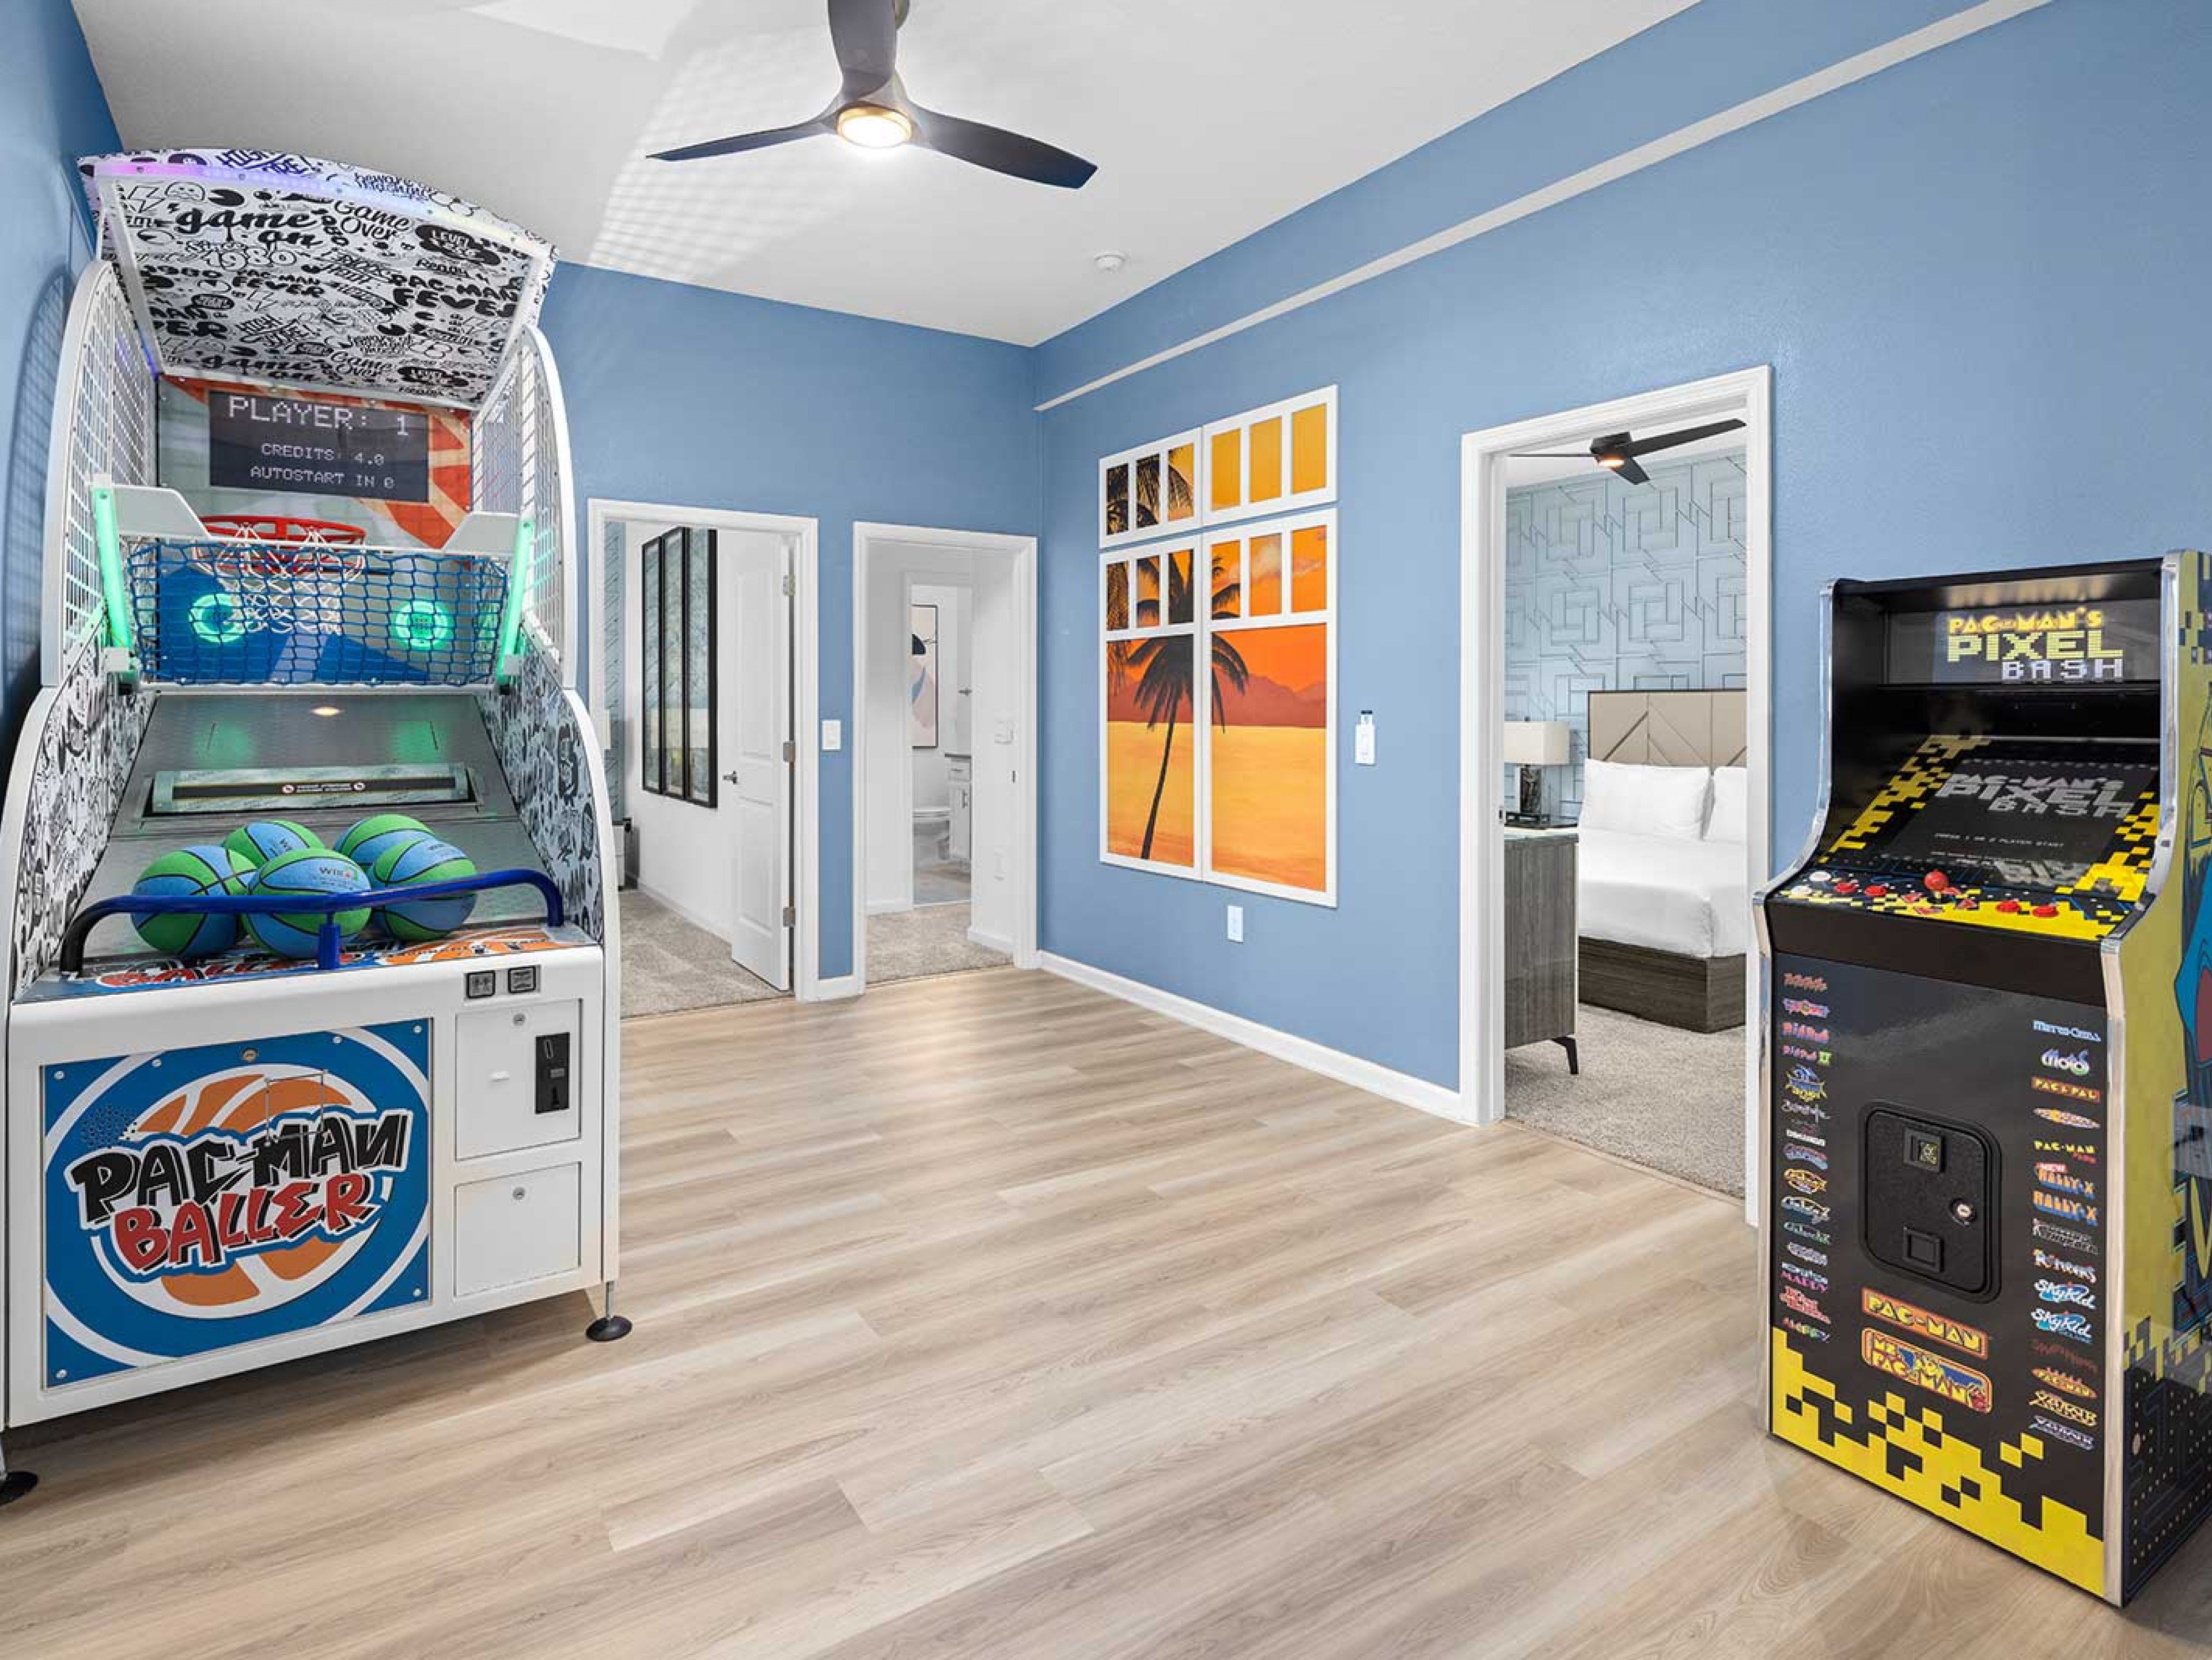 Harbor Island 9 vacation rentals with game rooms